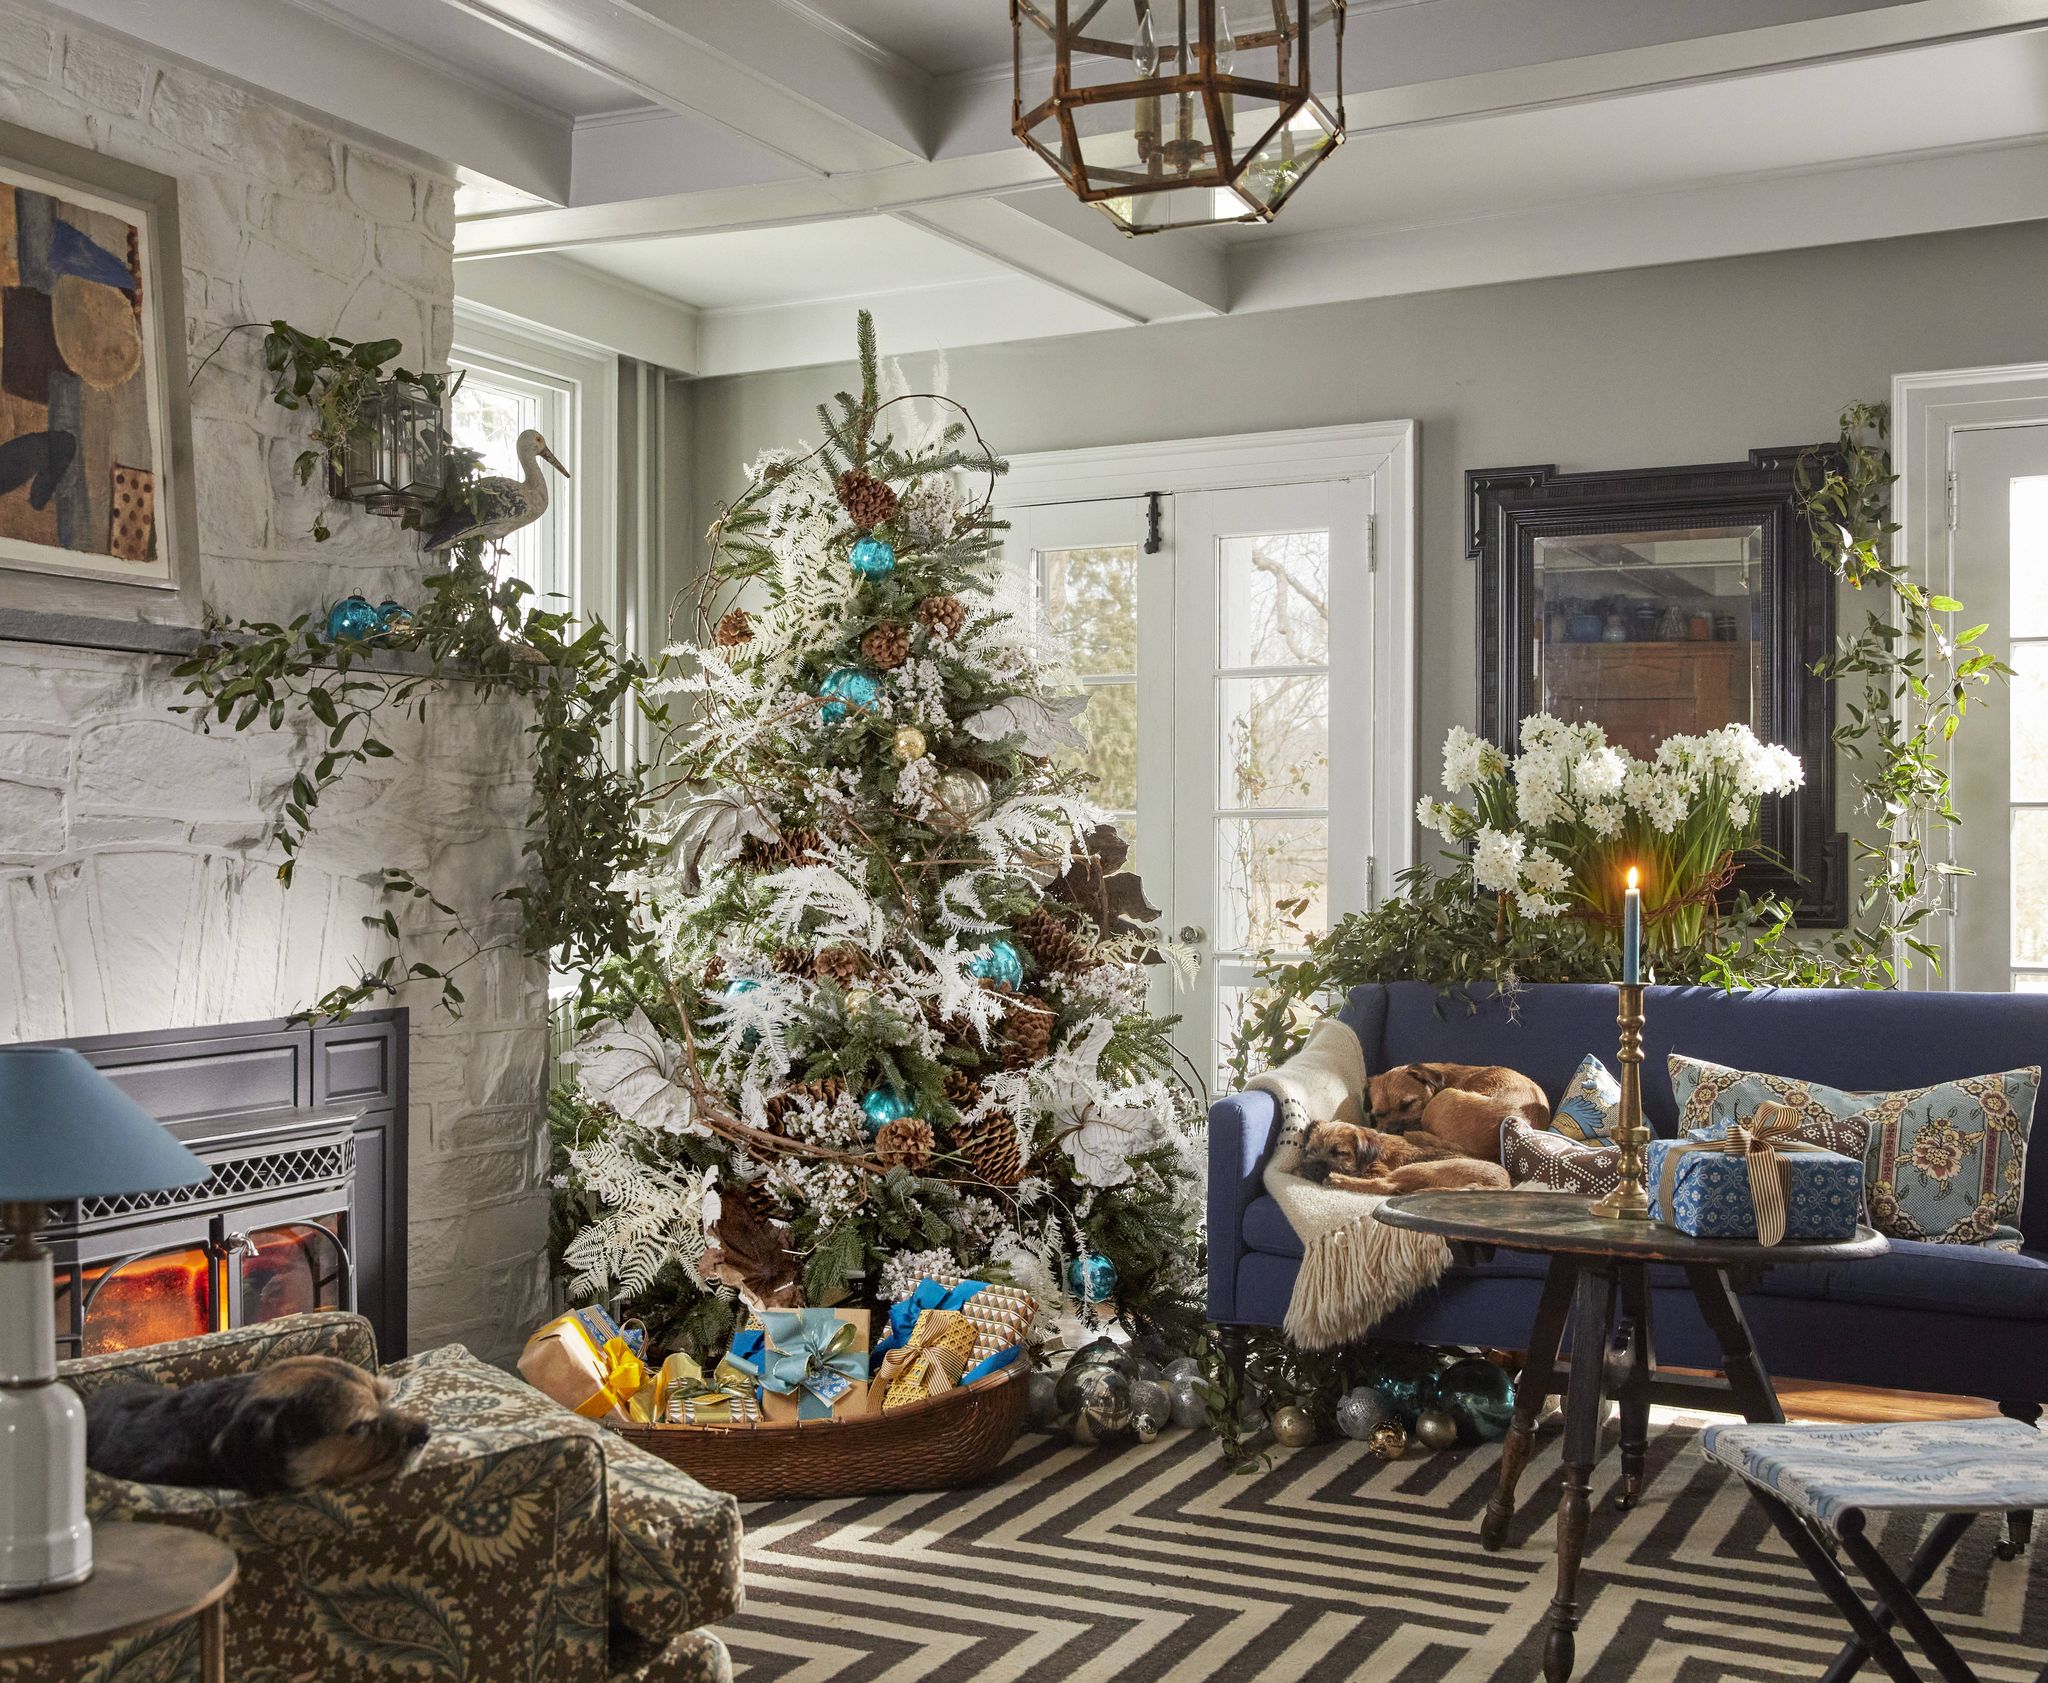 30 Beautiful Christmas Tree Ideas from Our Favorite Tastemakers